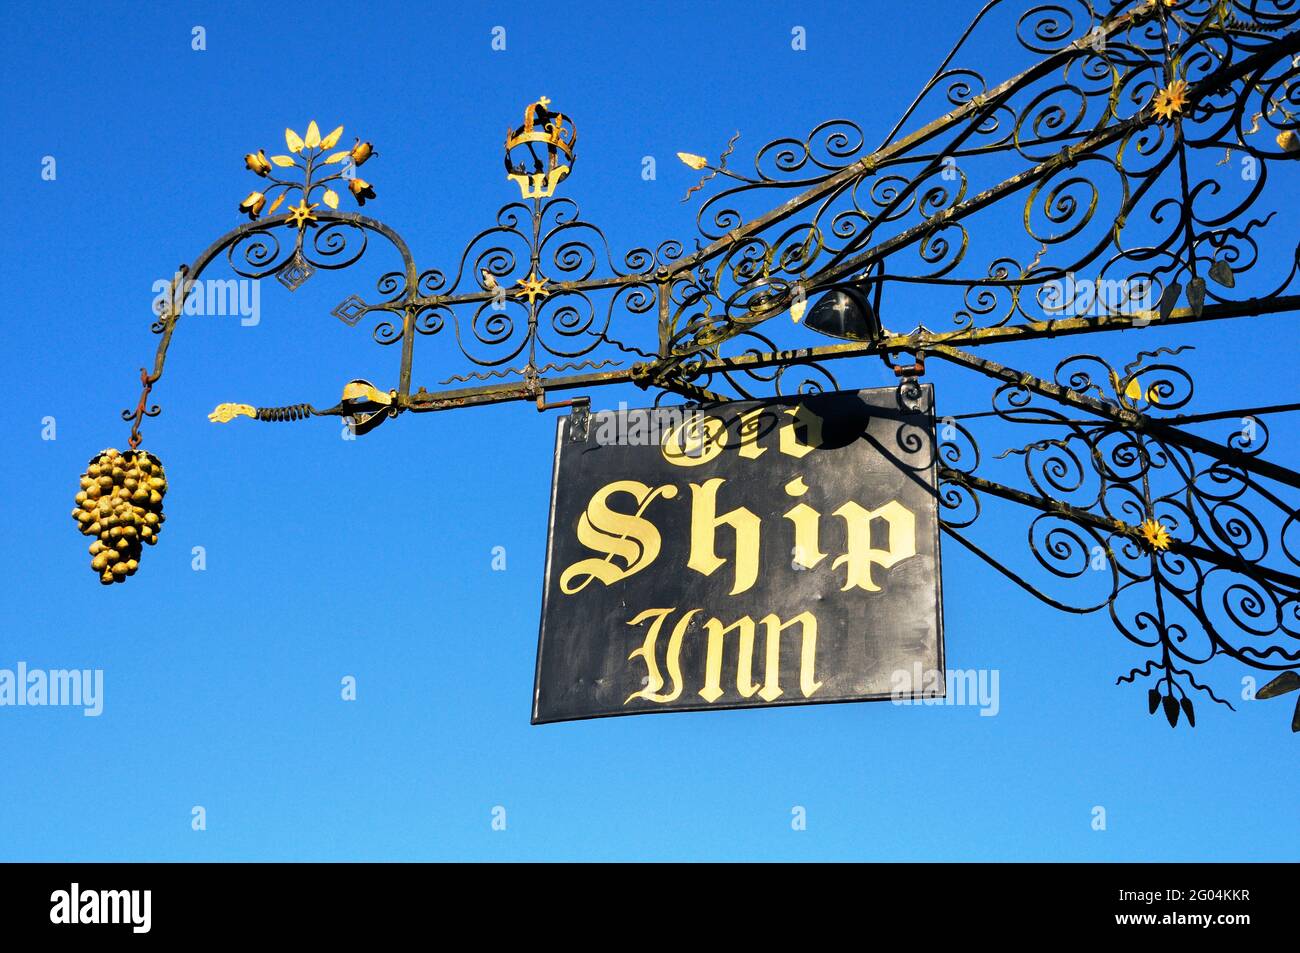 Ornate wrought iron pub sign against blue sky, Old Ship Inn, Mere, Wiltshire, England, UK Stock Photo